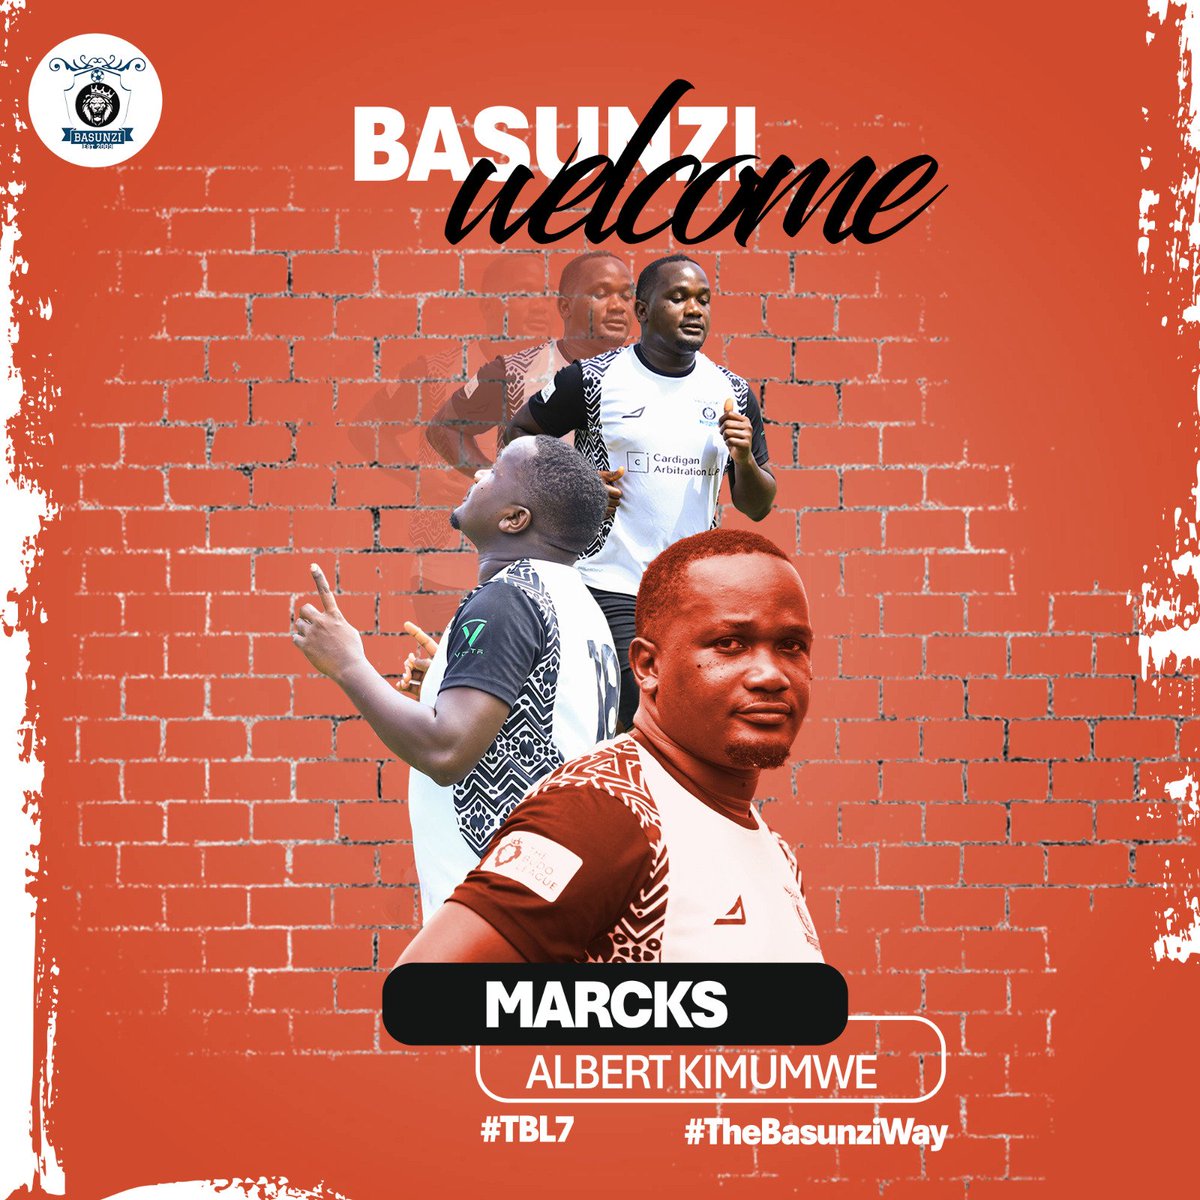 'Allow me to reintroduce myself'

That's 3 goals in 2 games for the best striker in @TheBudoLeague

Welcome to the family, Albert

Doing things #TheBasunziway 
#TBL7